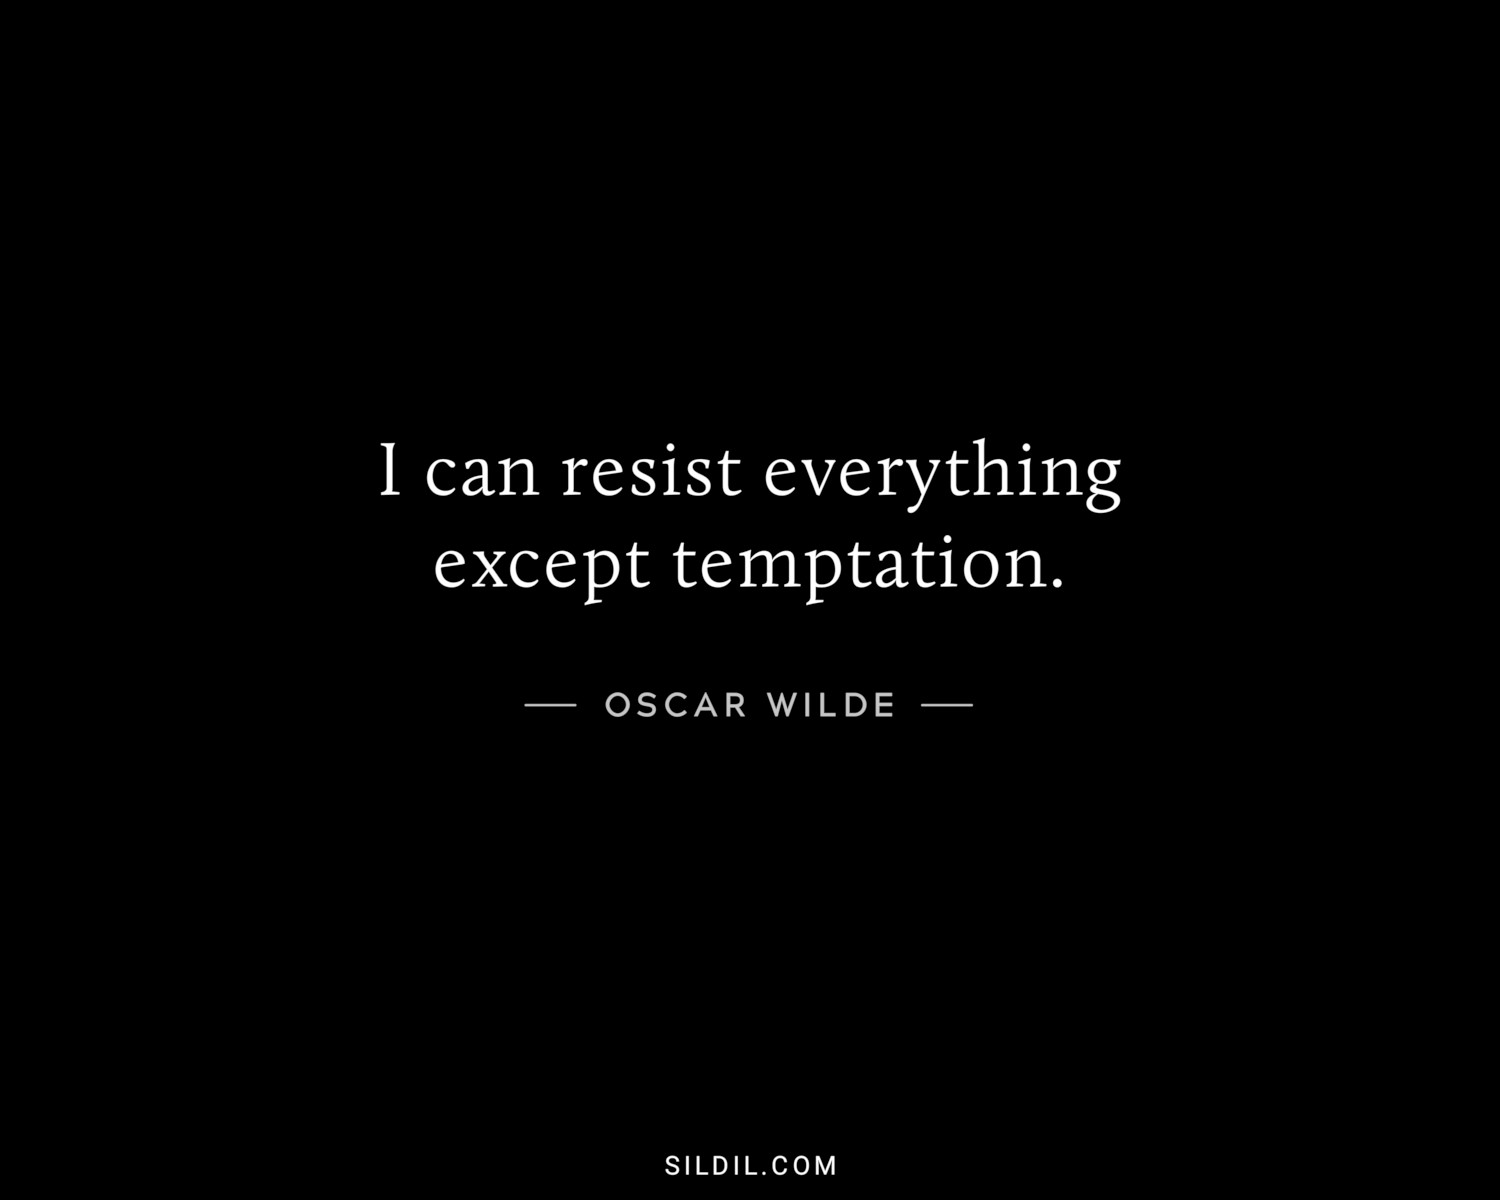 I can resist everything except temptation.